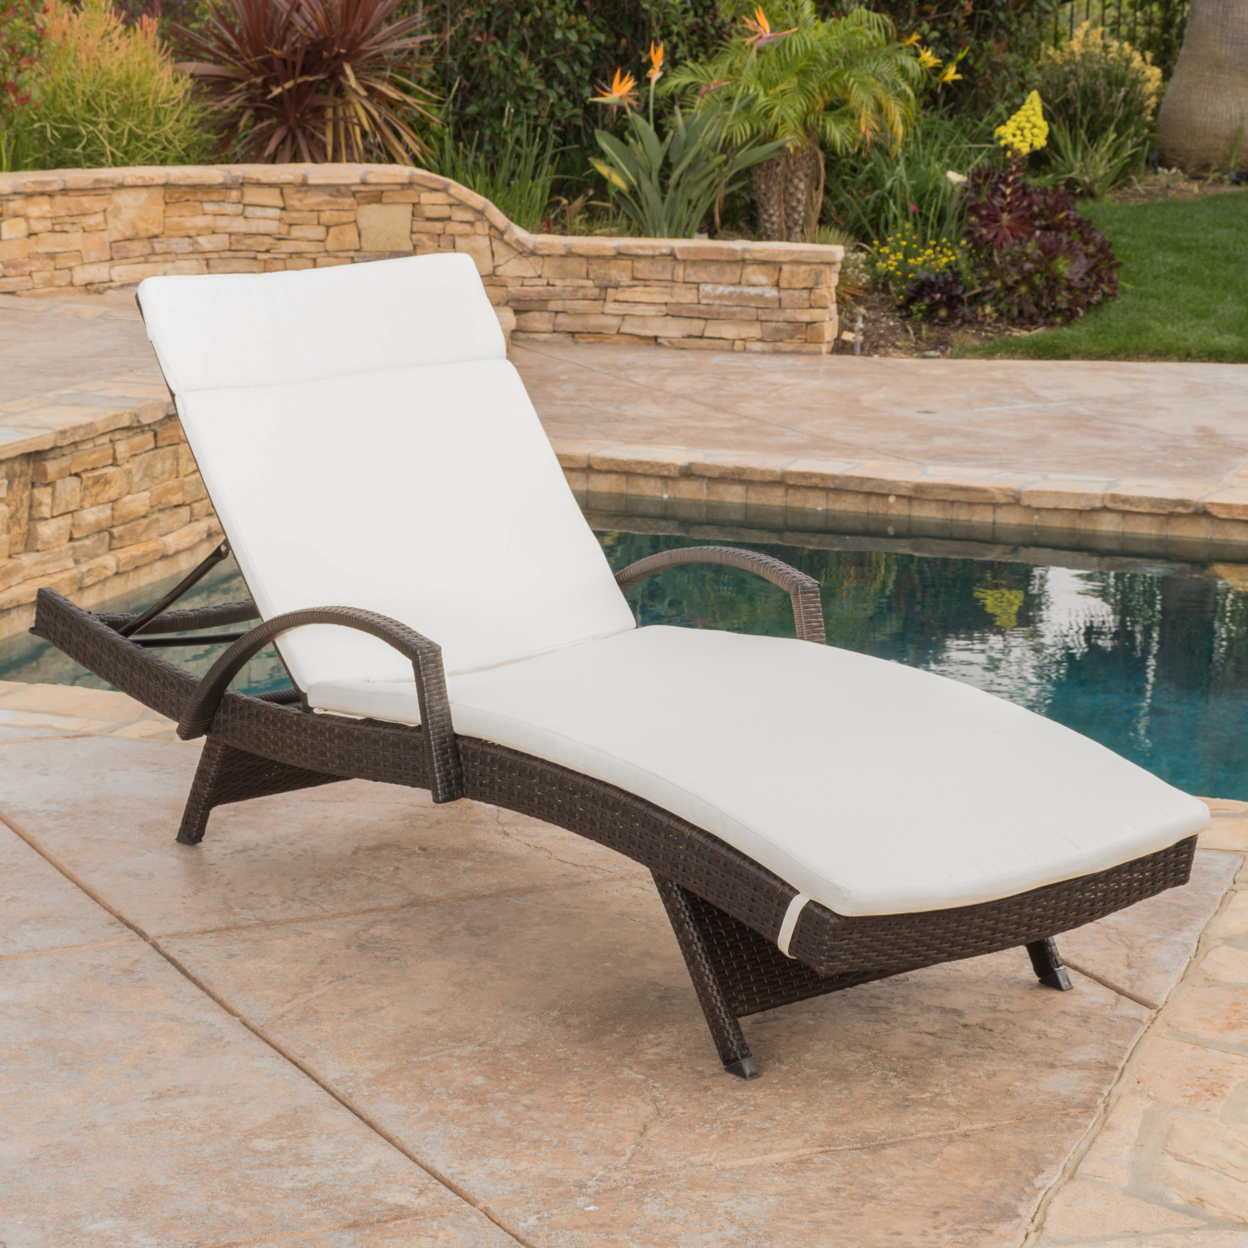 Lakeport Outdoor Adjustable Armed Chaise Lounge Chair With Cushion - Textured Beige Cushion